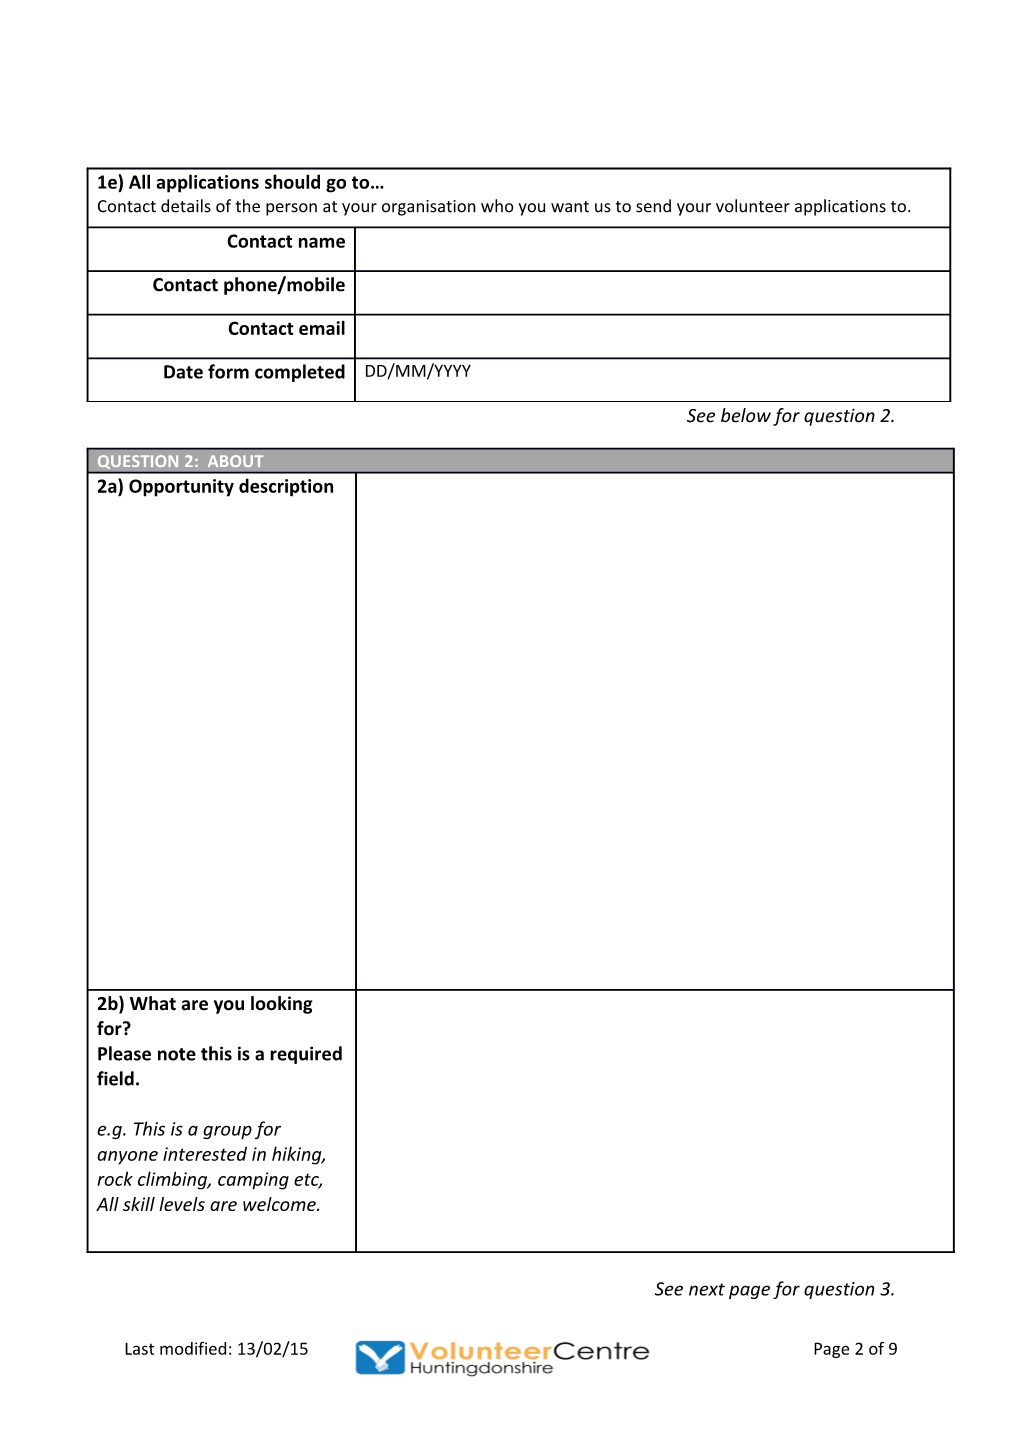 The Information You Provide on This Form Will Be Used by Us at HVC to Match Volunteers